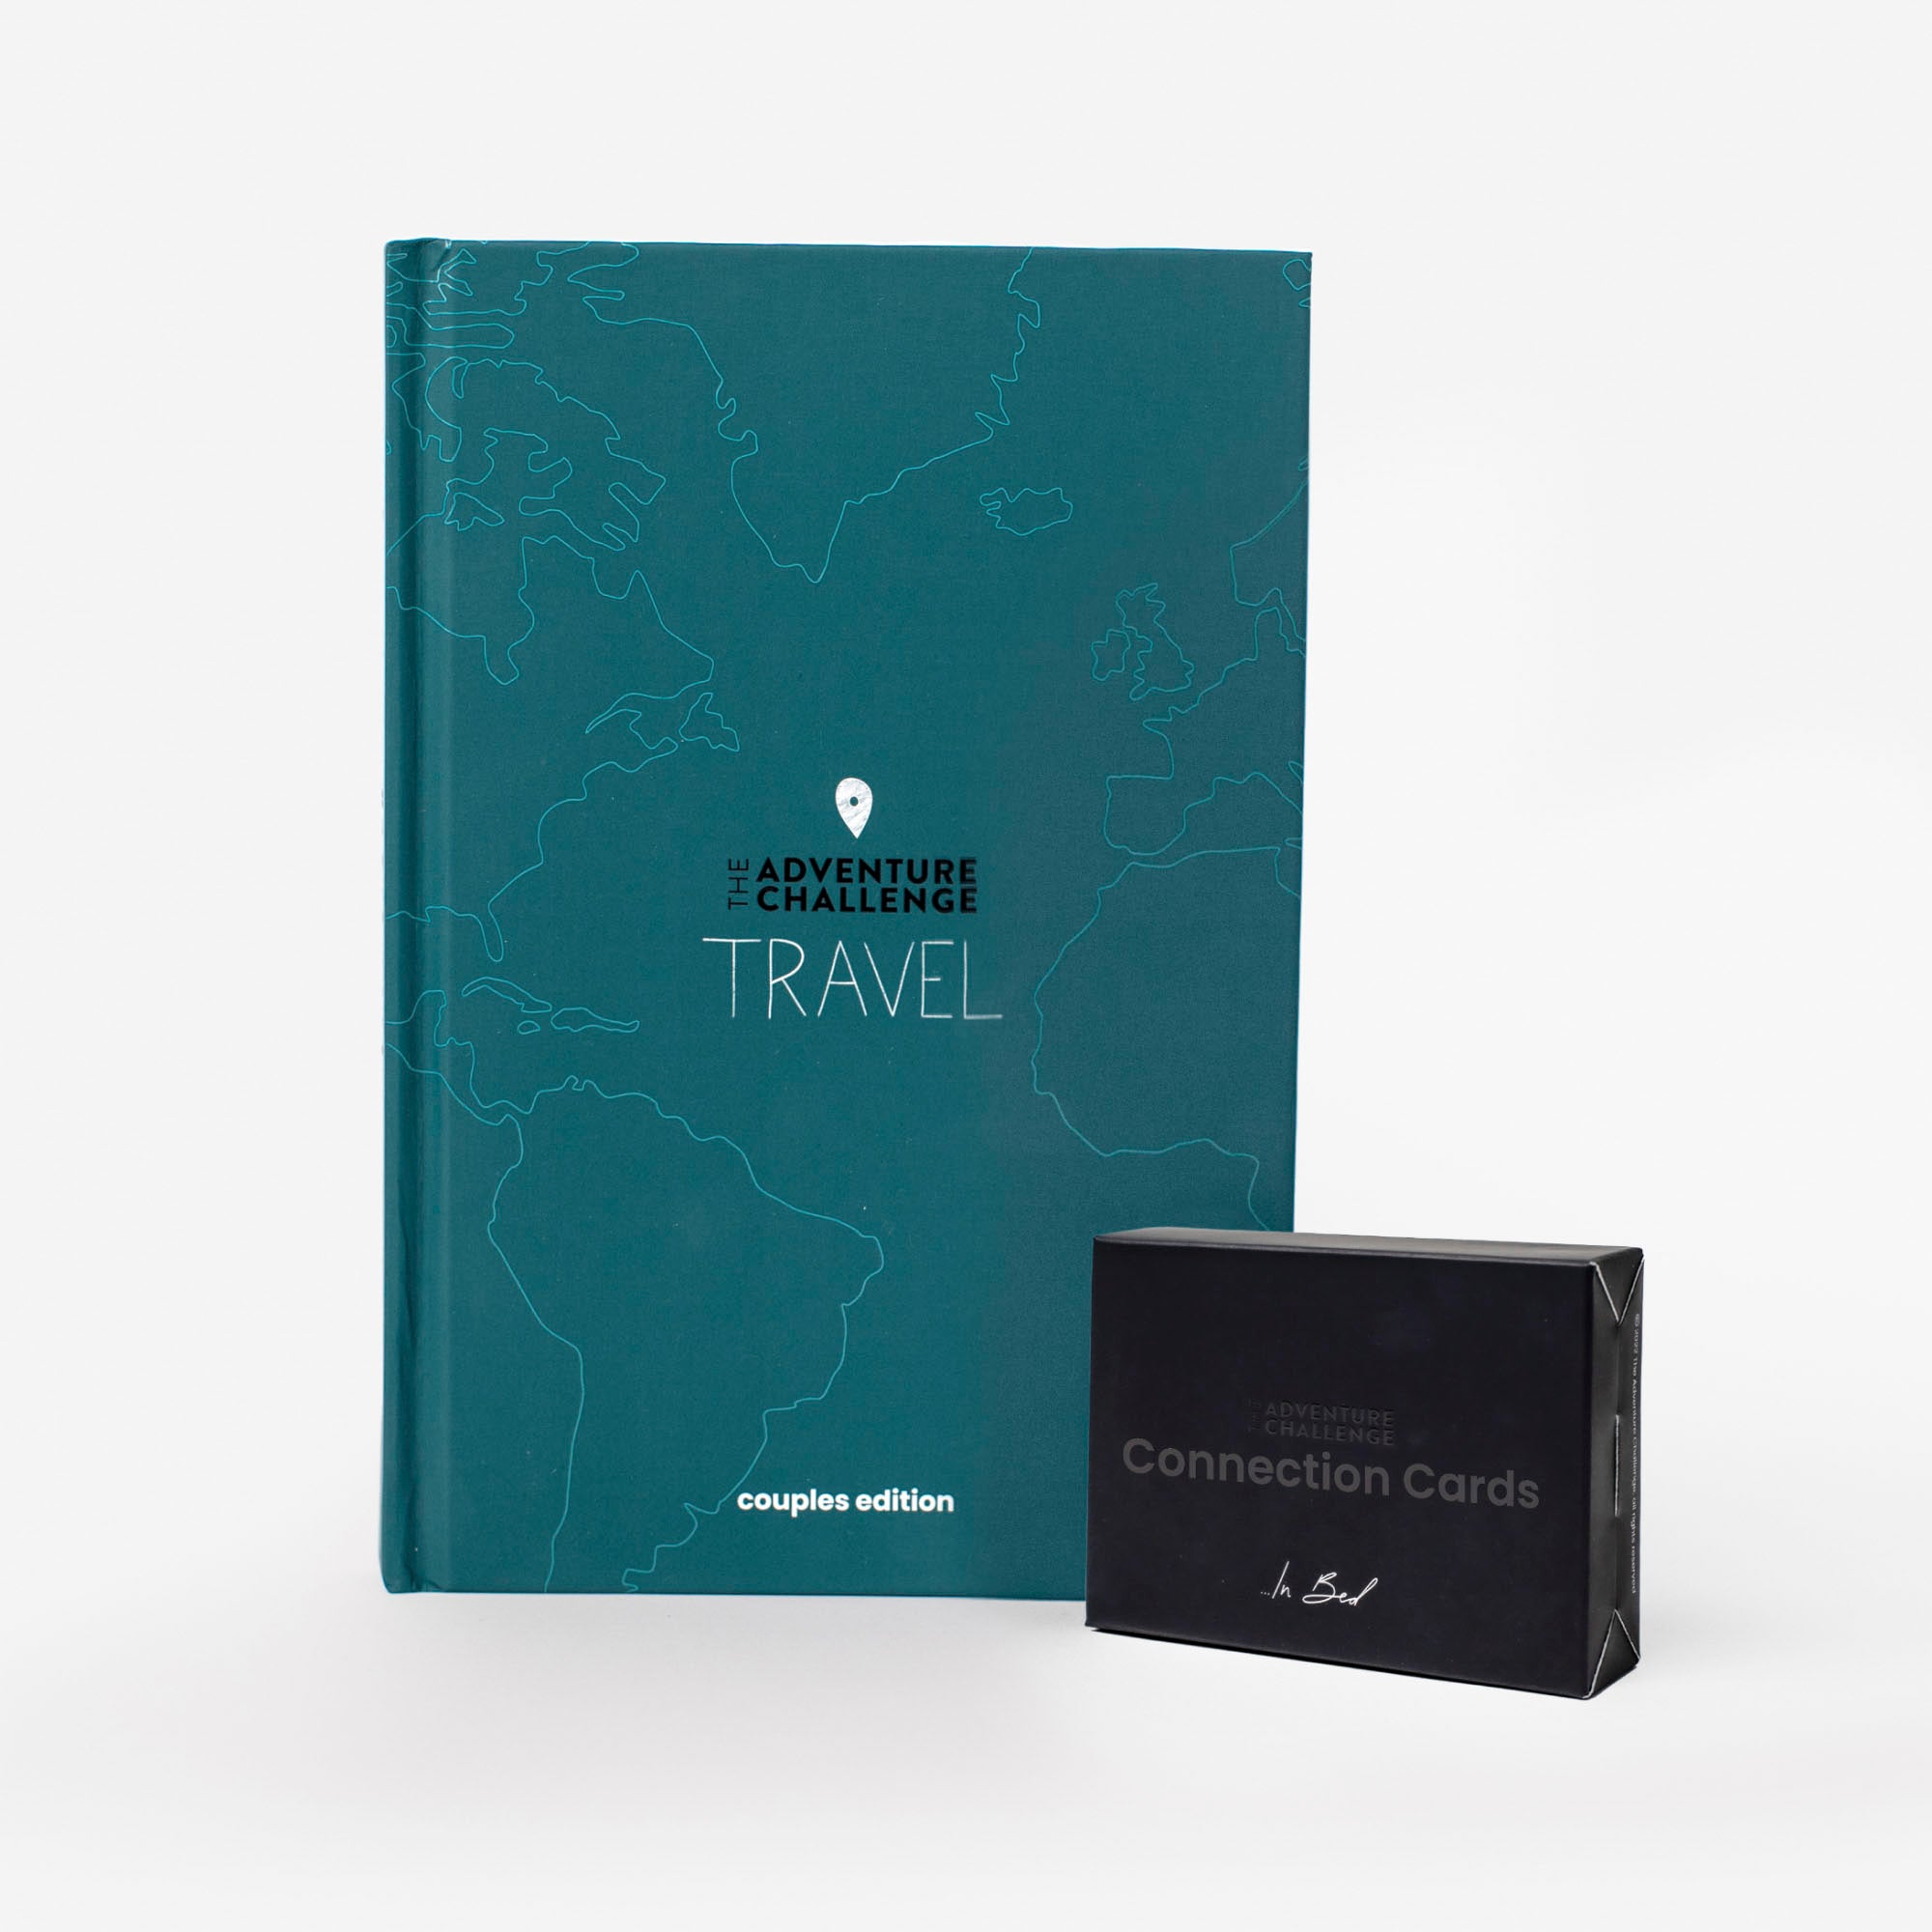 Travel and Connection Cards In Bed Bundle